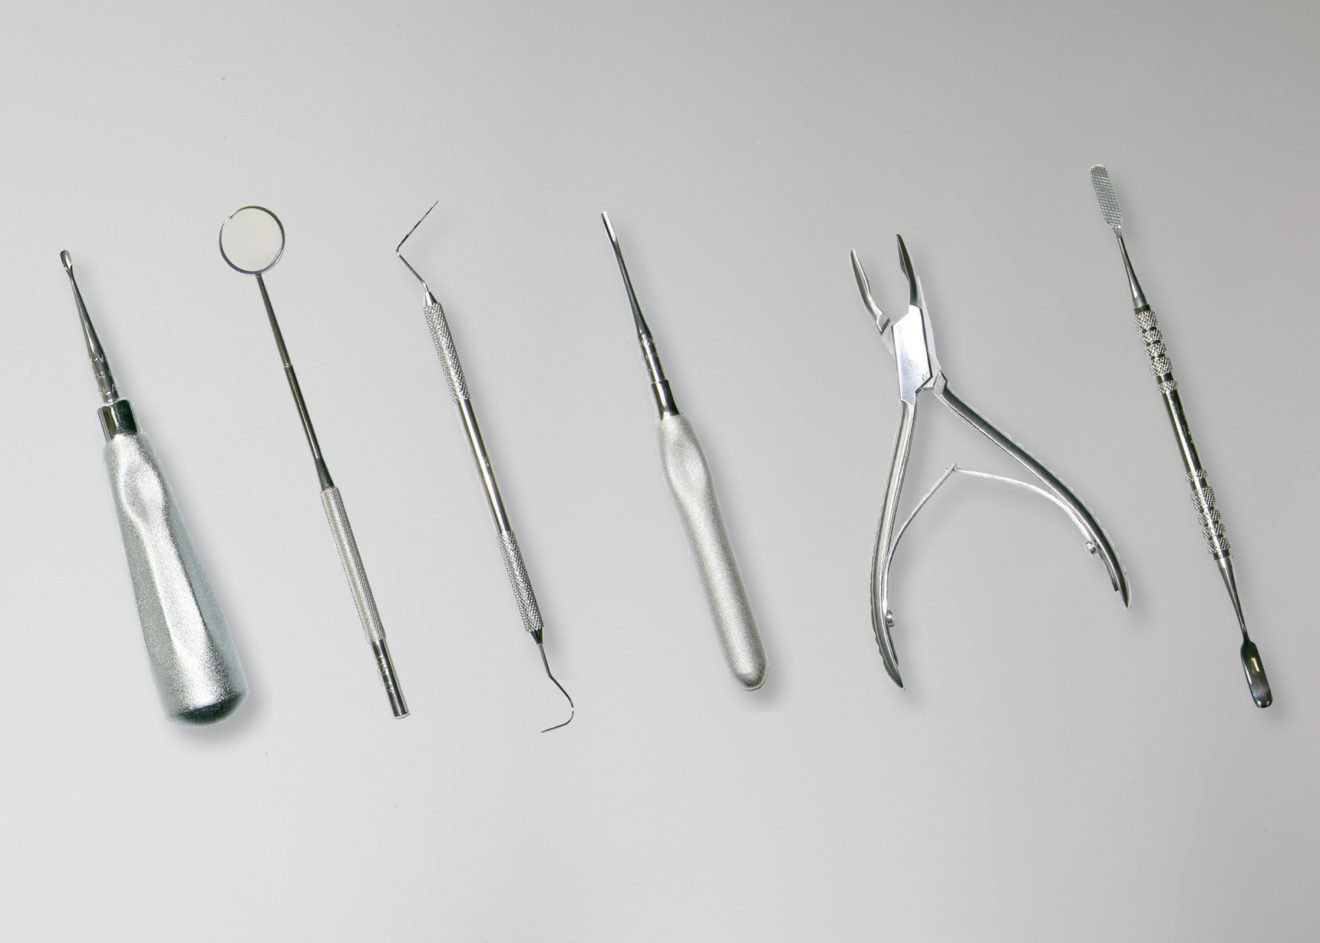 dental instruments names and functions